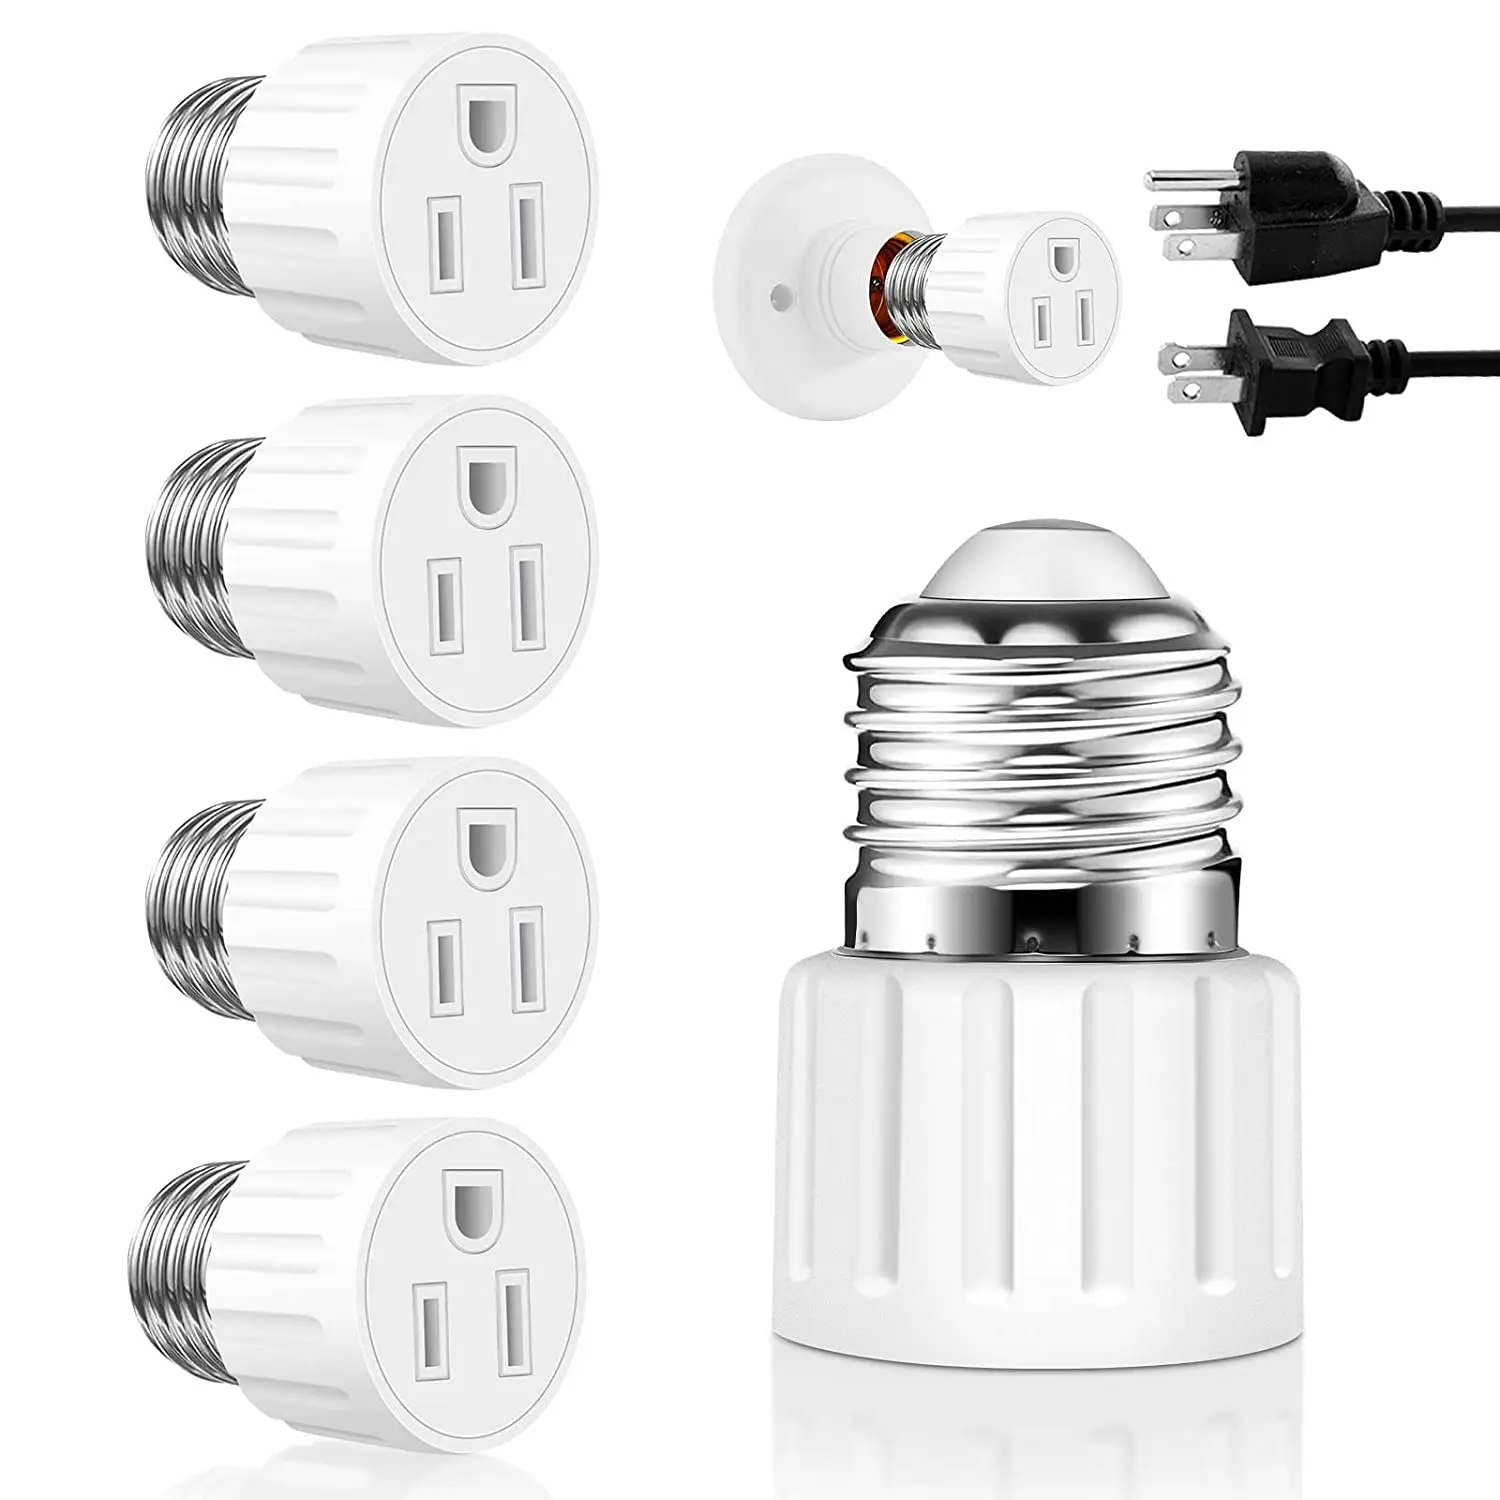 2 Packs E26 E27 Light Socket to Plug Adapter Polarized Screw in Outlet for Adapter 2 / 3Prong Convert Porch Patio Garage 5687 to 6n6 6n2 ecc88 6922 6dj8 ecc85 6n11 vacuum tube amplifier convert socket adapter